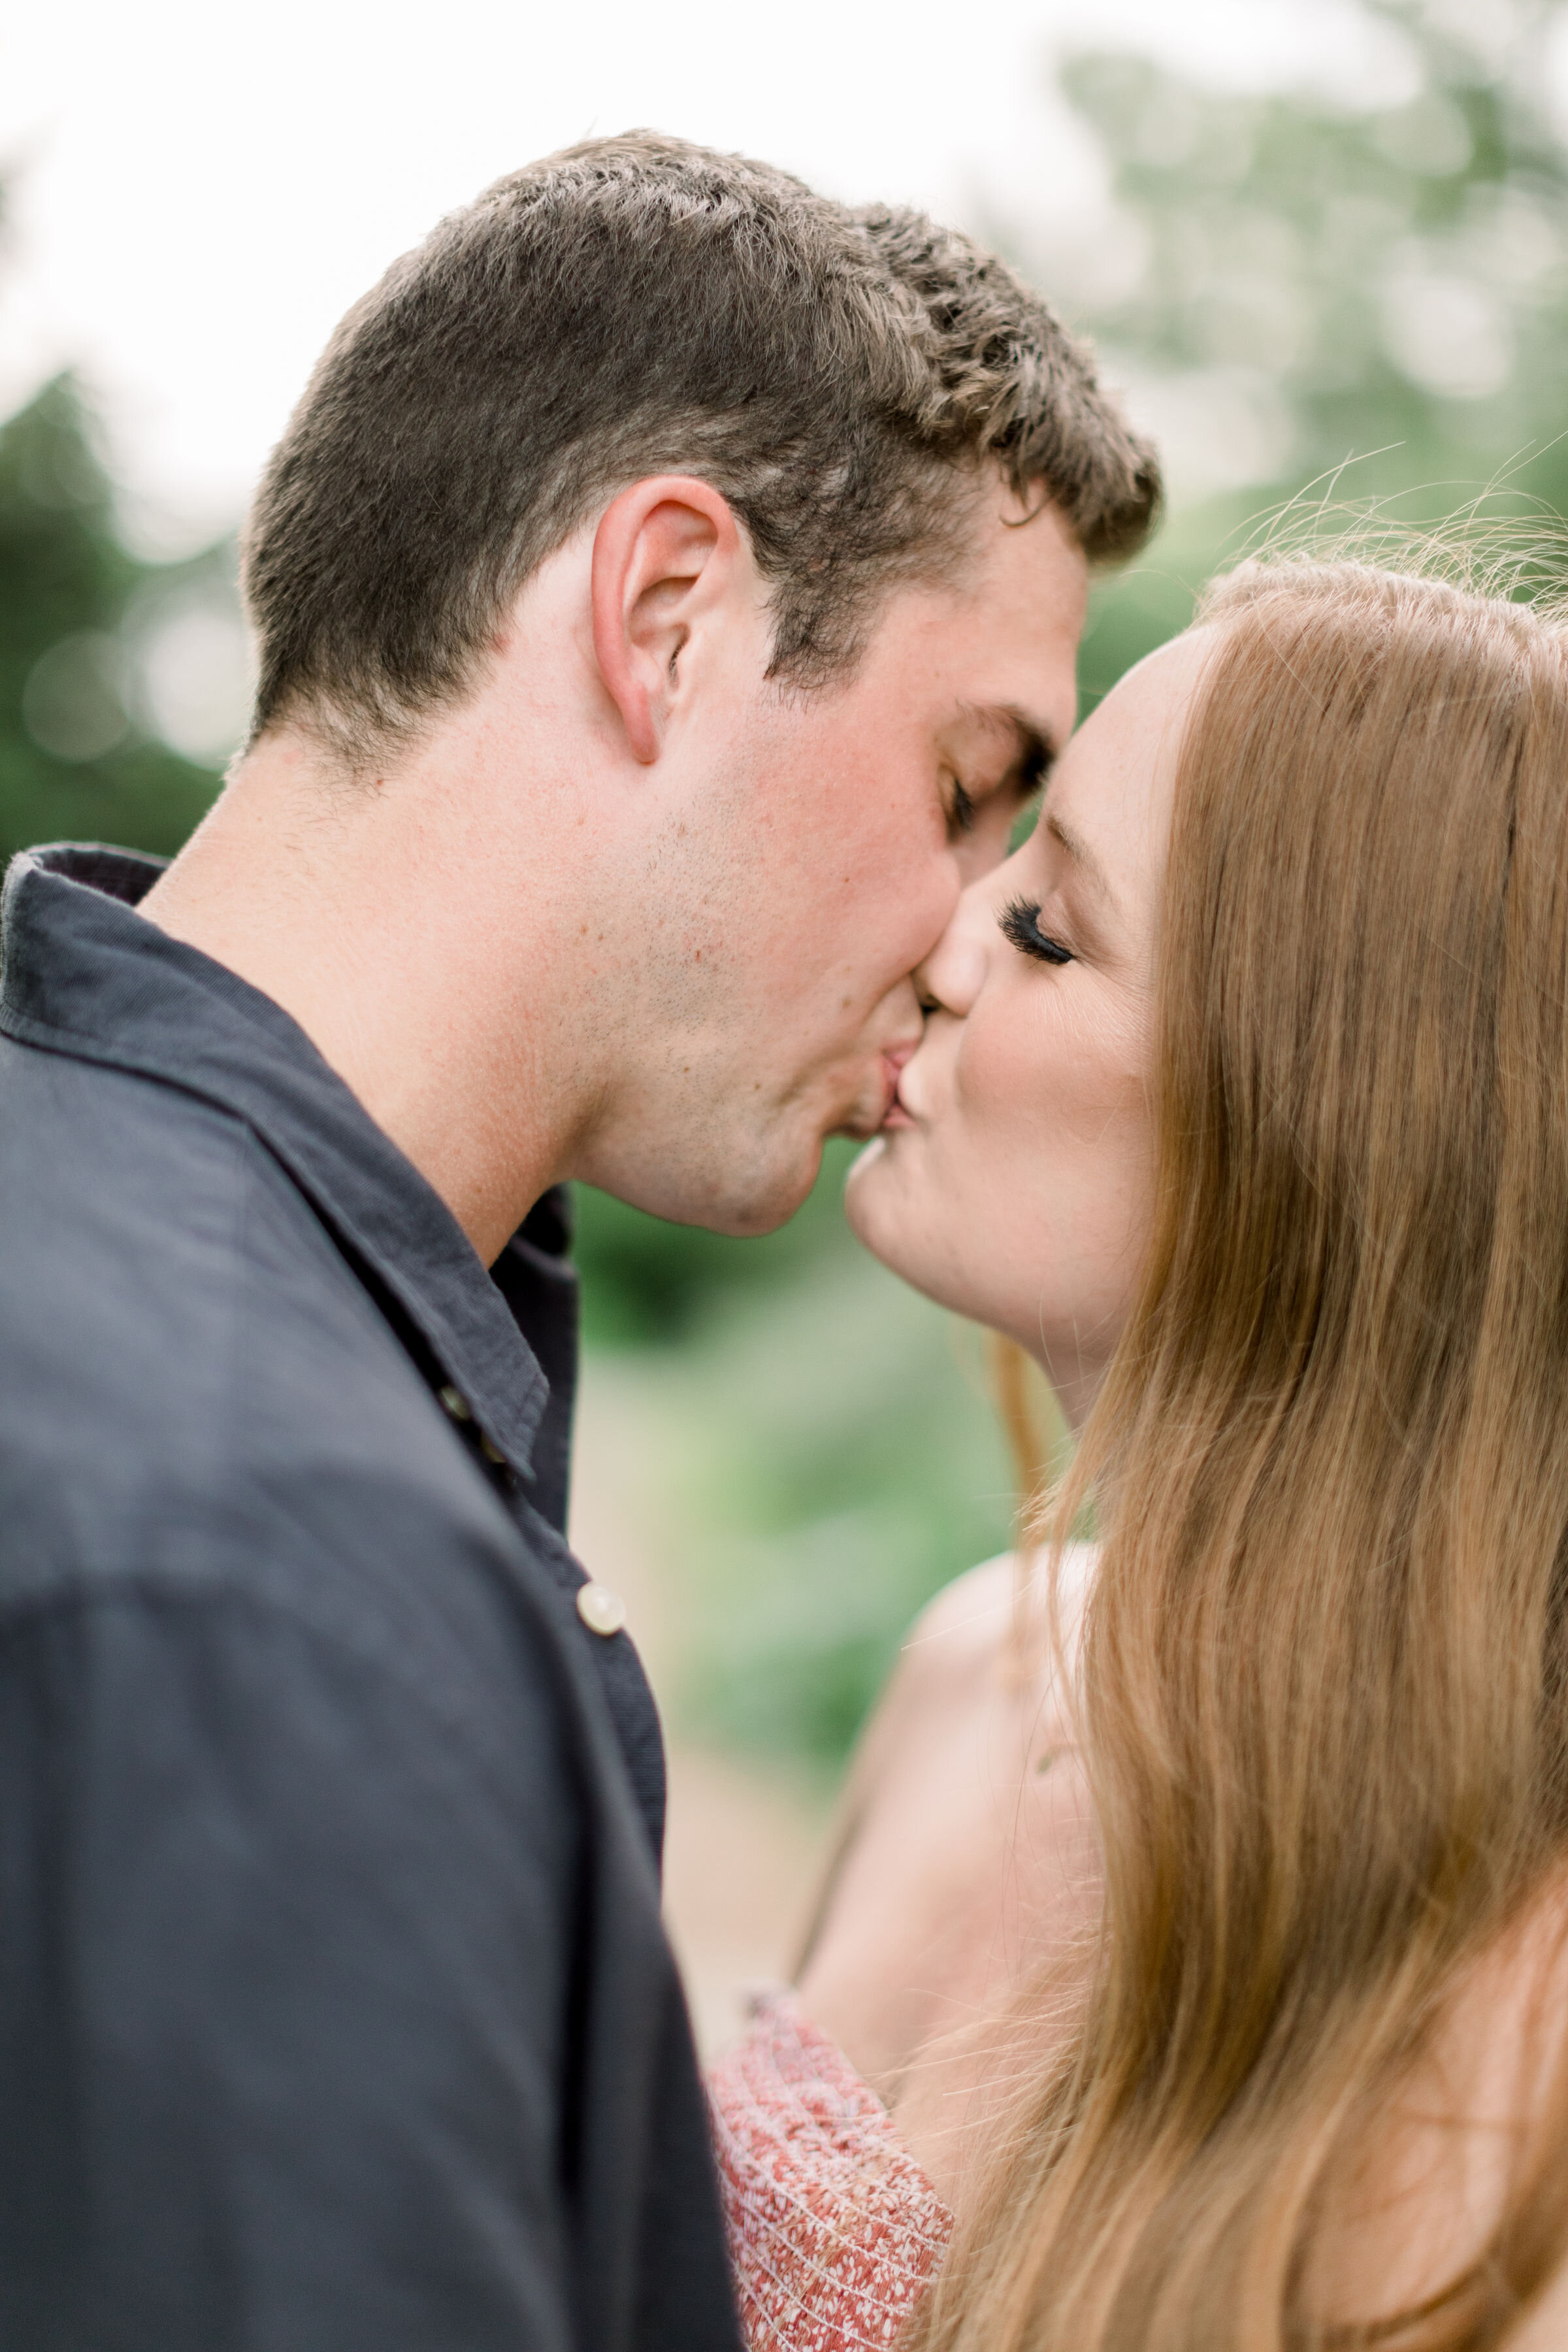  Chelsea Mason Photography captures a tender moment between this engaged couple as they kiss romantically in a wooded pathway in Arboretum, Ottawa. arboretum Ottawa photographer formal engagement outfits up close kissing photo women's auburn hair  #C